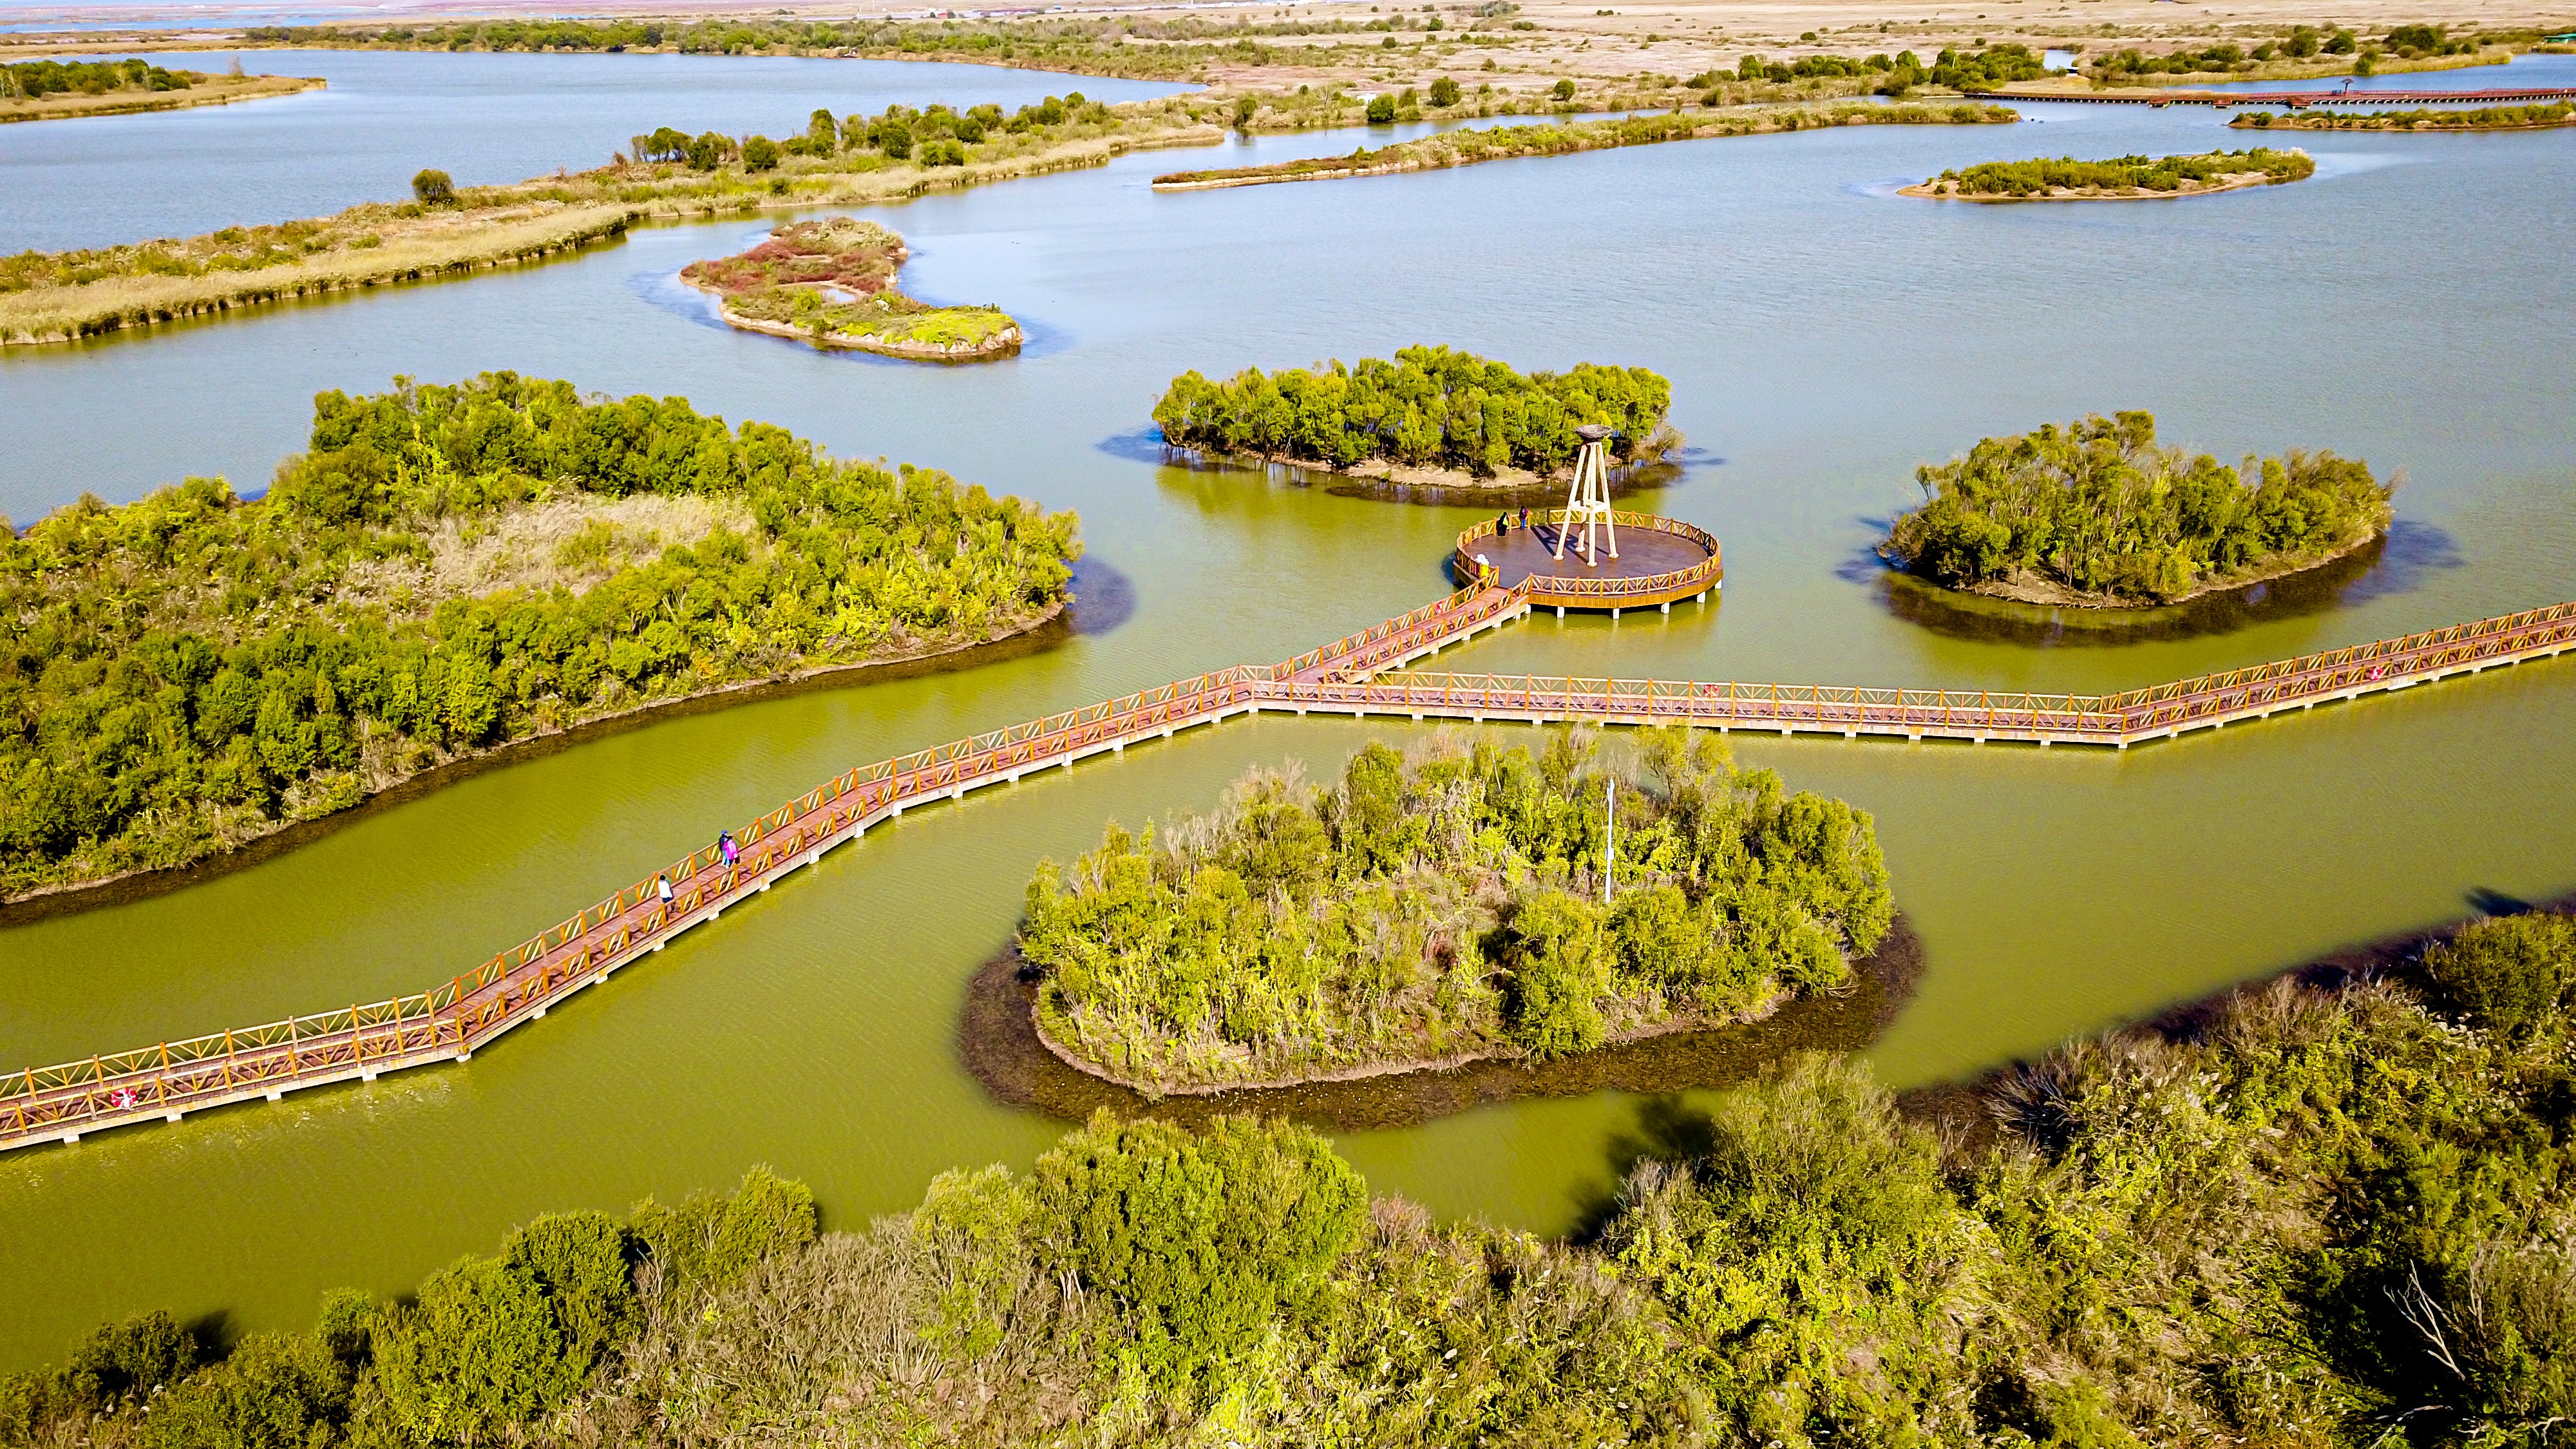 The Yellow River Delta National Nature Reserve in Dongying, Shandong province, boasts rich wetland systems